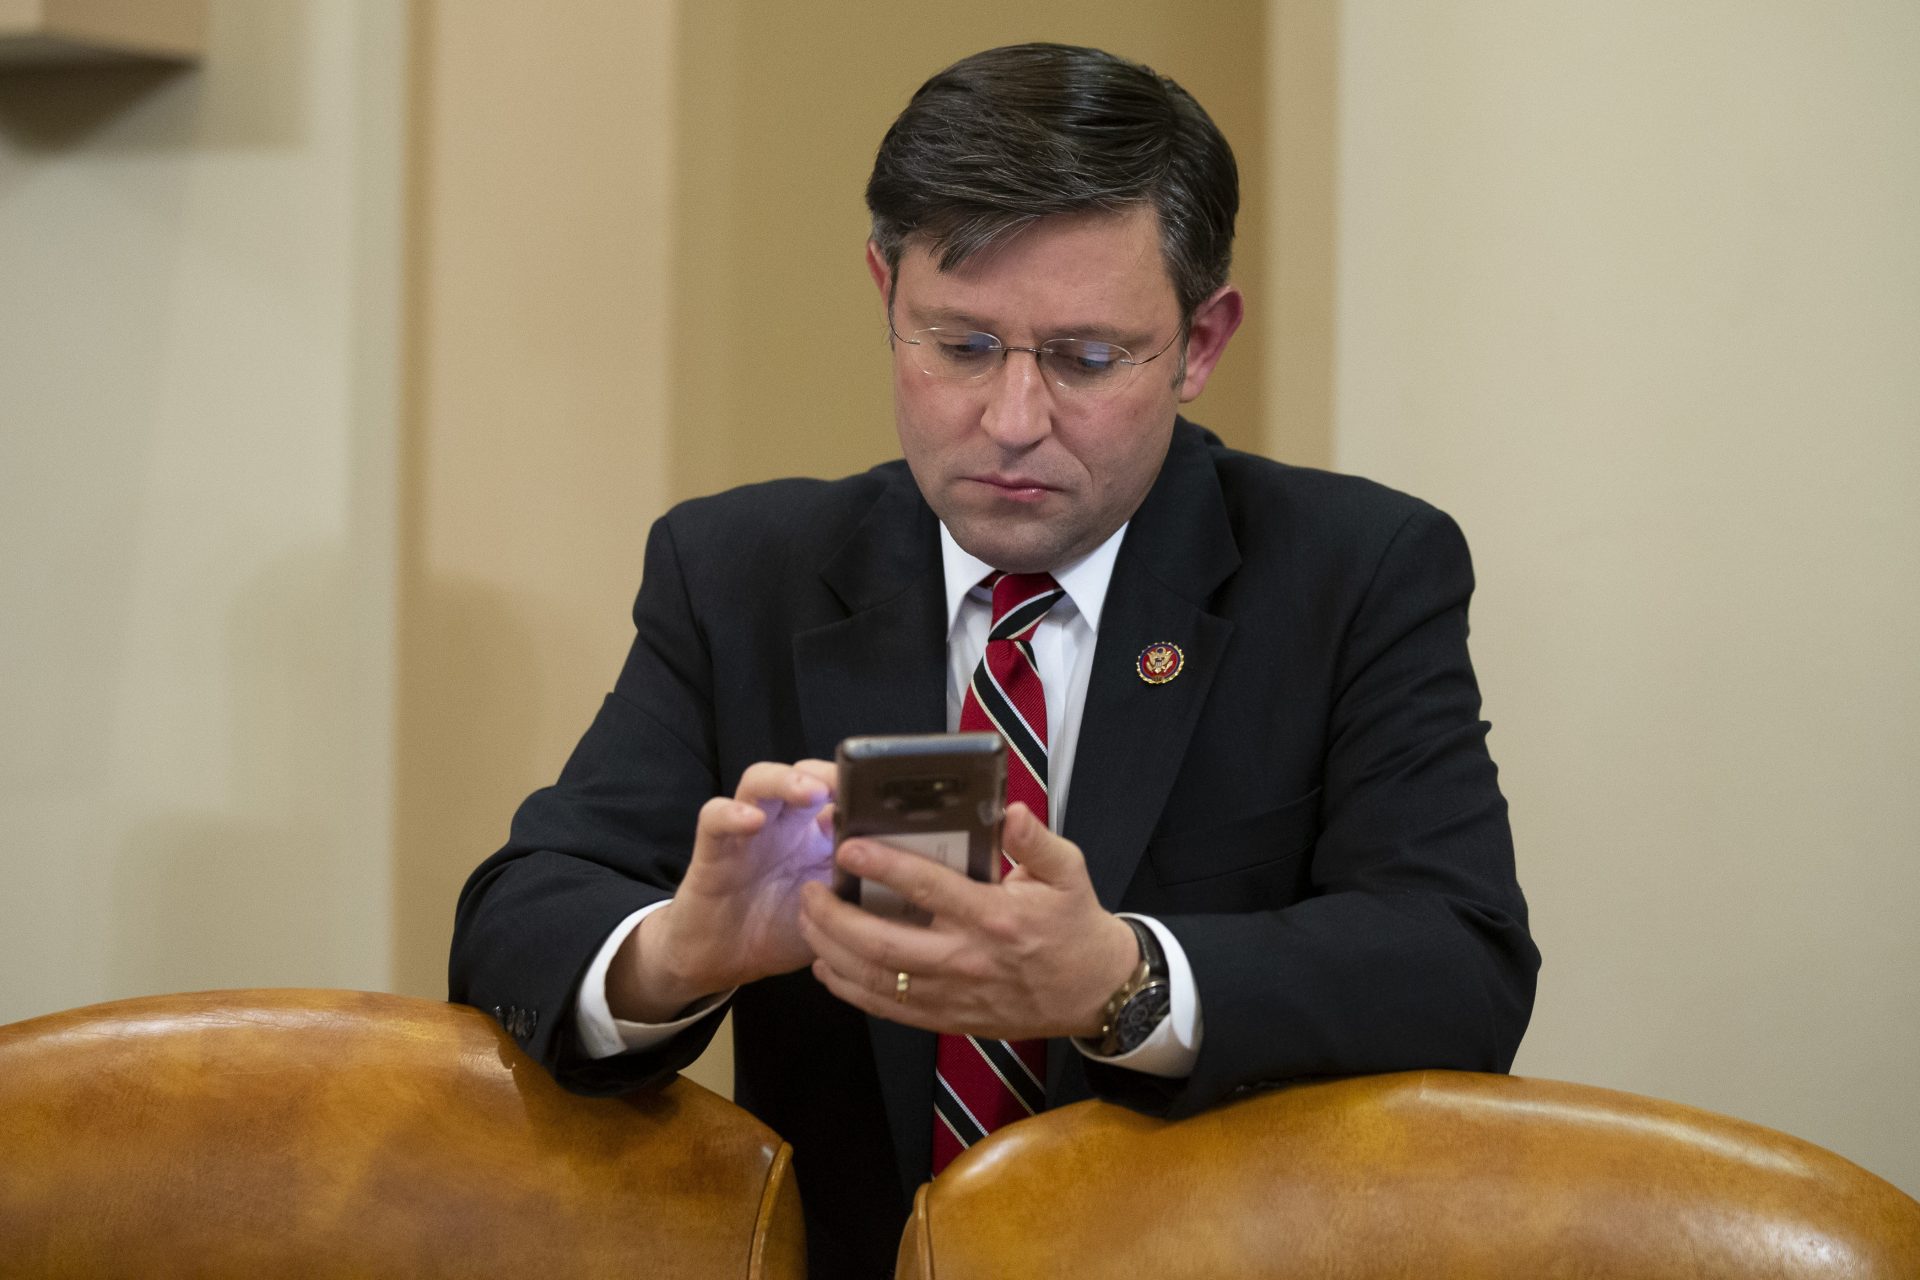 Rep. Mike Johnson, R-La., looks at a phone during a break of the House Judiciary Committee markup of the articles of impeachment against President Donald Trump, on Capitol Hill, Thursday, Dec. 12, 2019, in Washington.